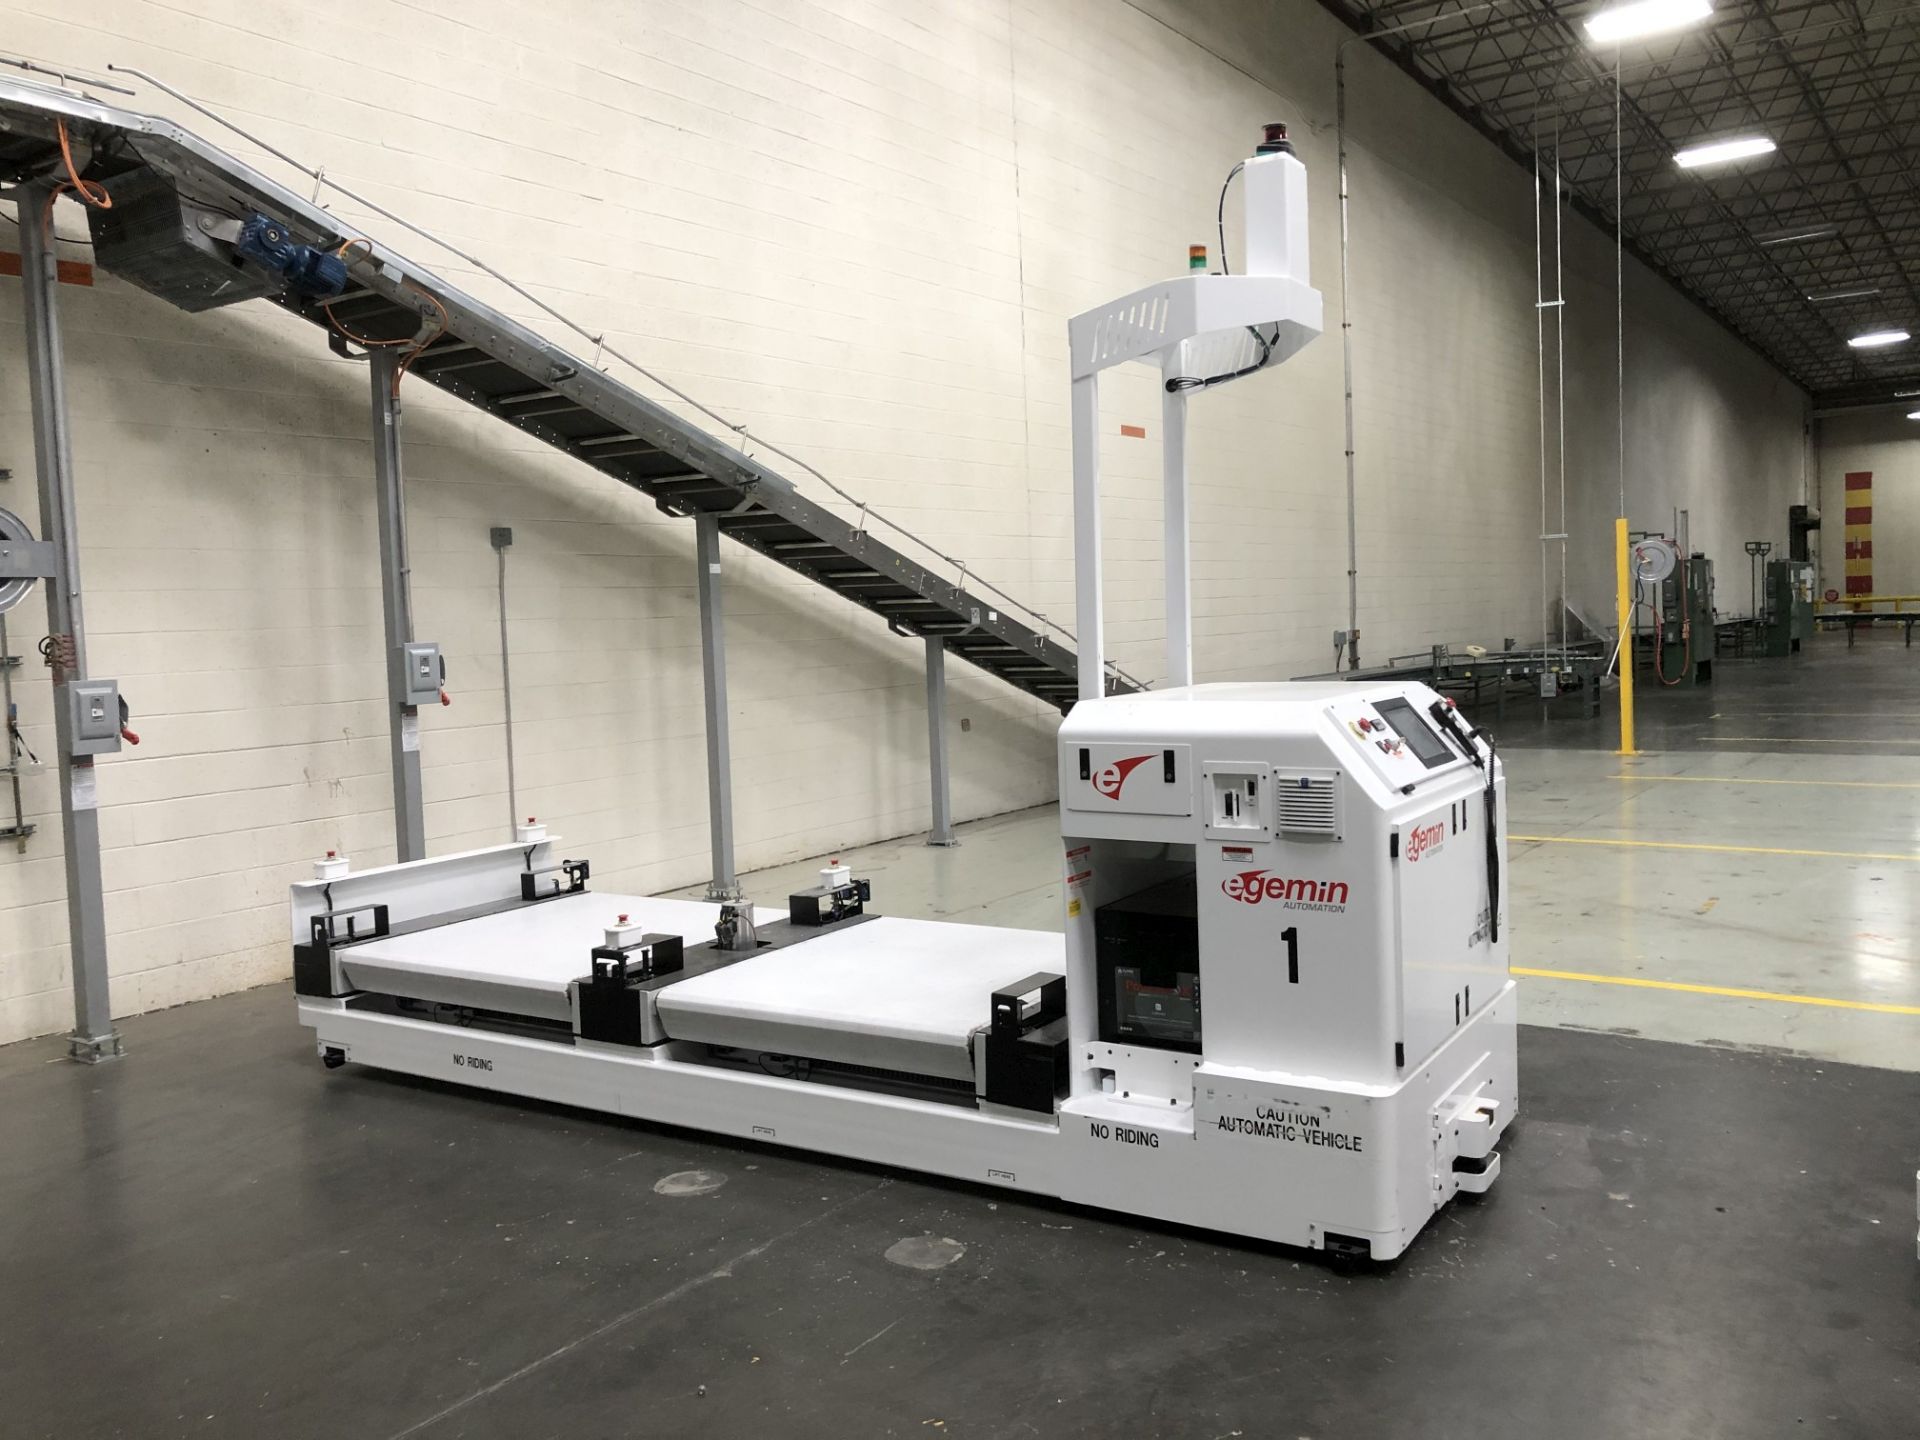 2017 Egemin Automation Unit Load Deck Automated Guided Vehicle (AGV), Model LTV 0515 L, 300 FPM - Image 3 of 11